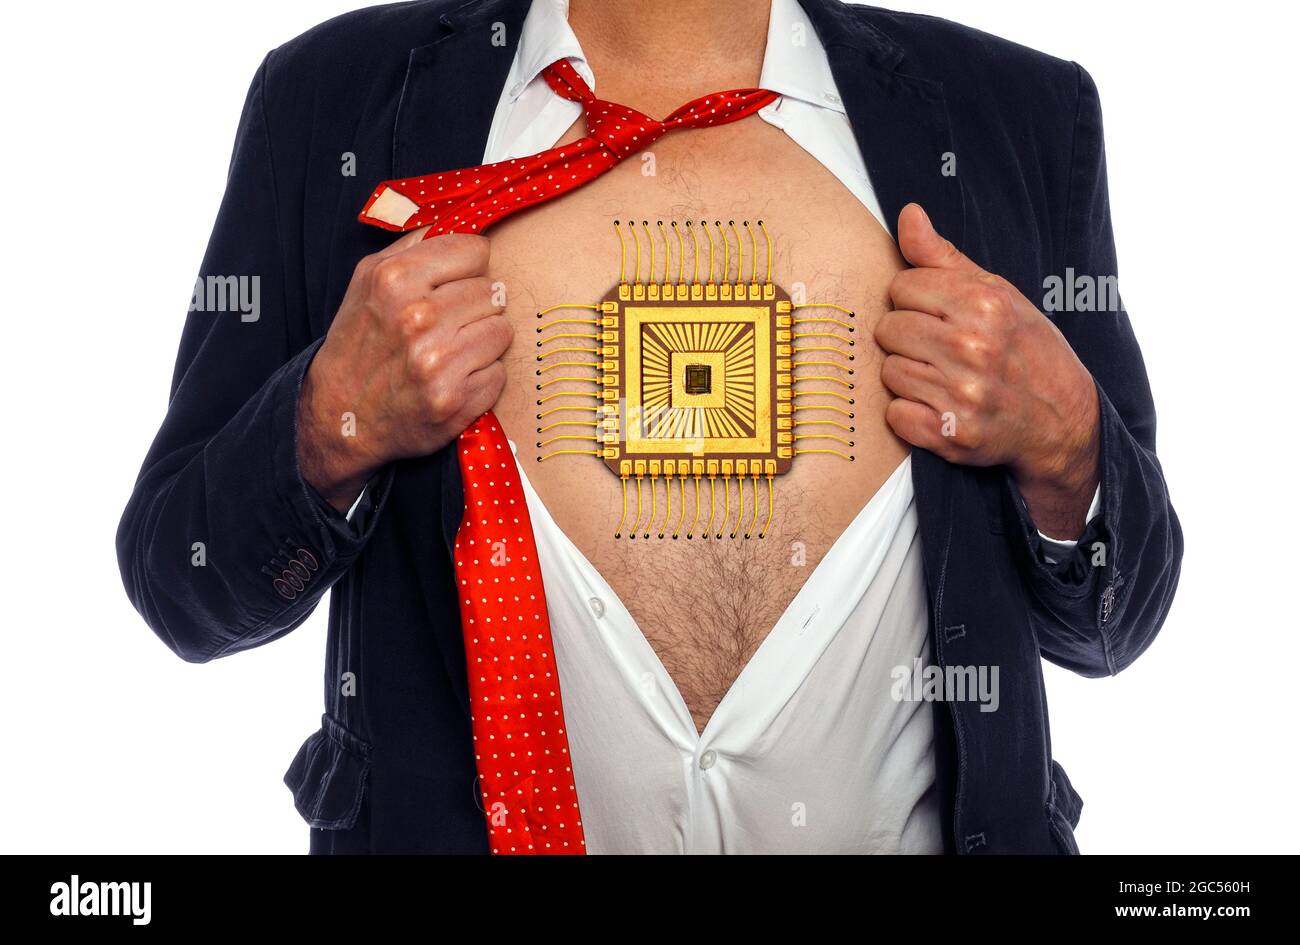 Man with a chip on his chest, conceptual composite image Stock Photo